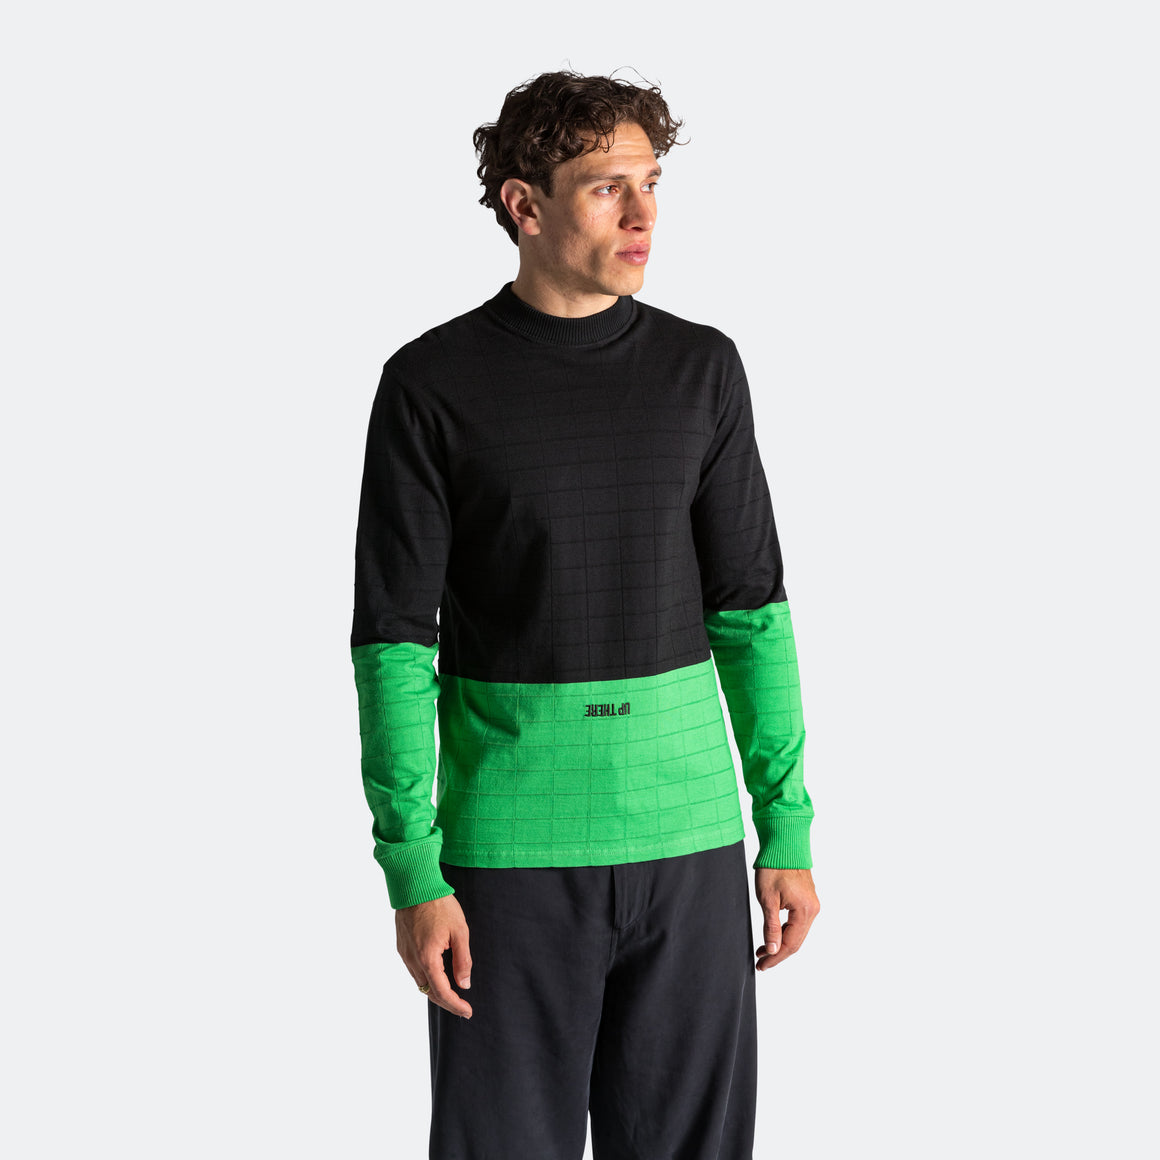 Armor Lux - Crewneck x UP THERE - Black/Fern Green - UP THERE